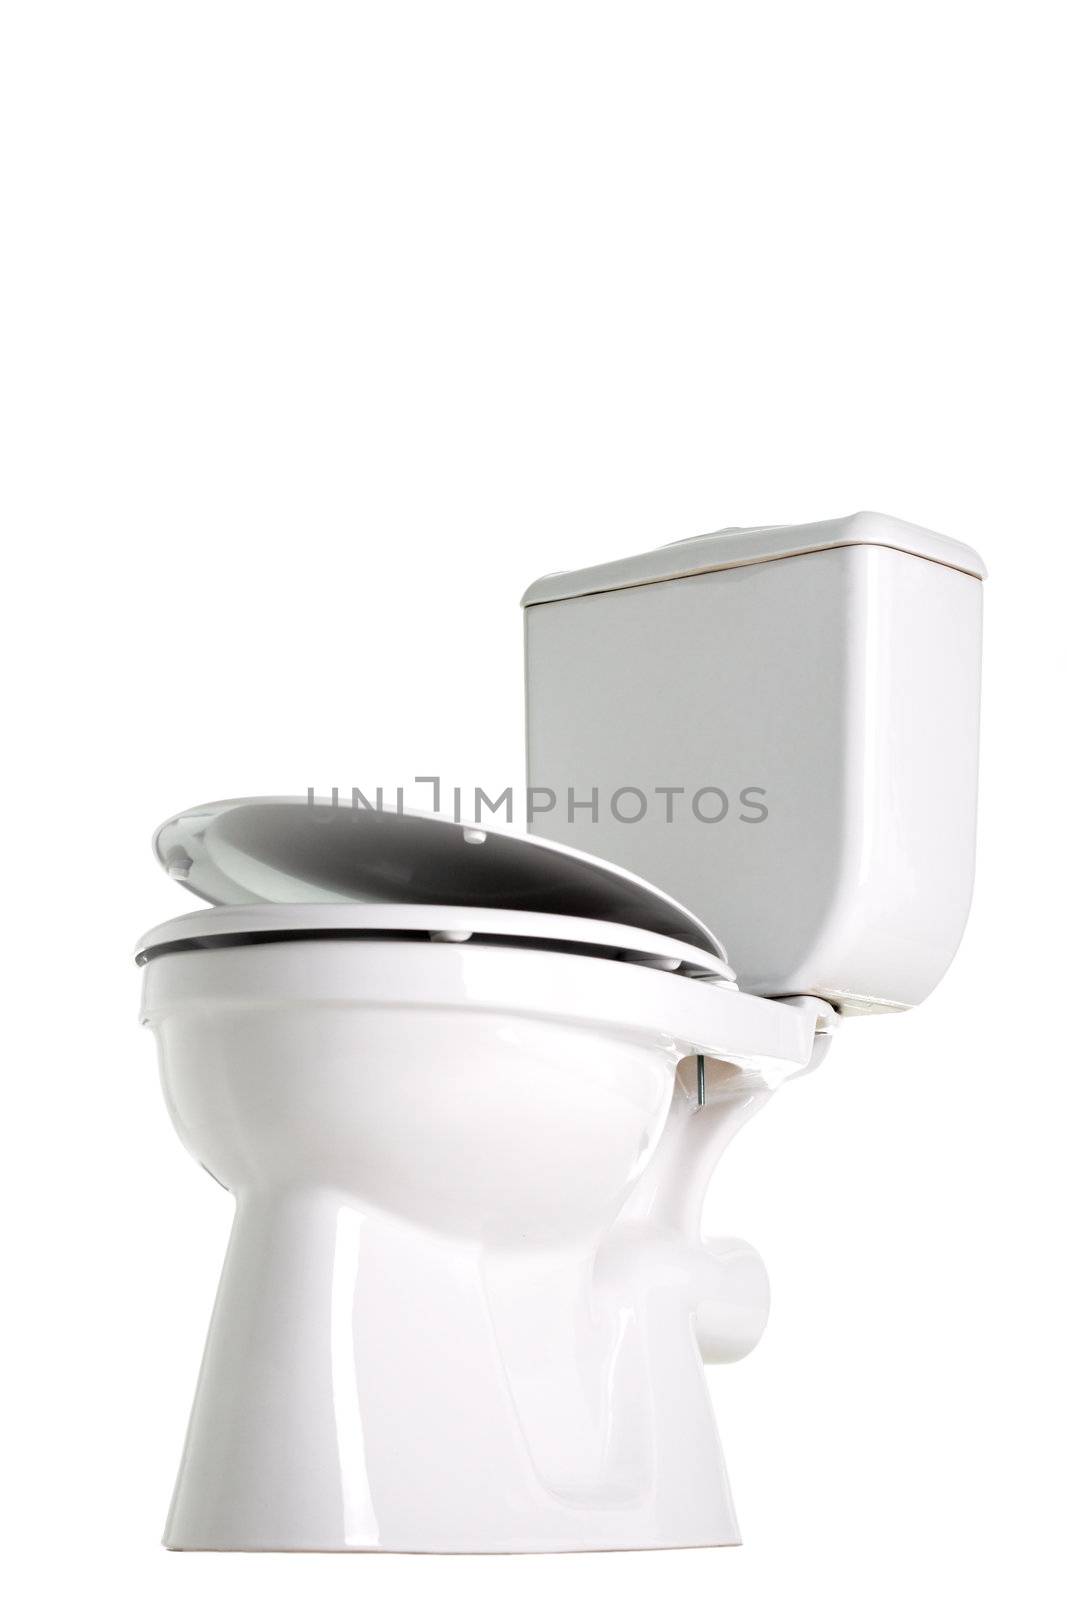 closed toilet, side view, isolated on white